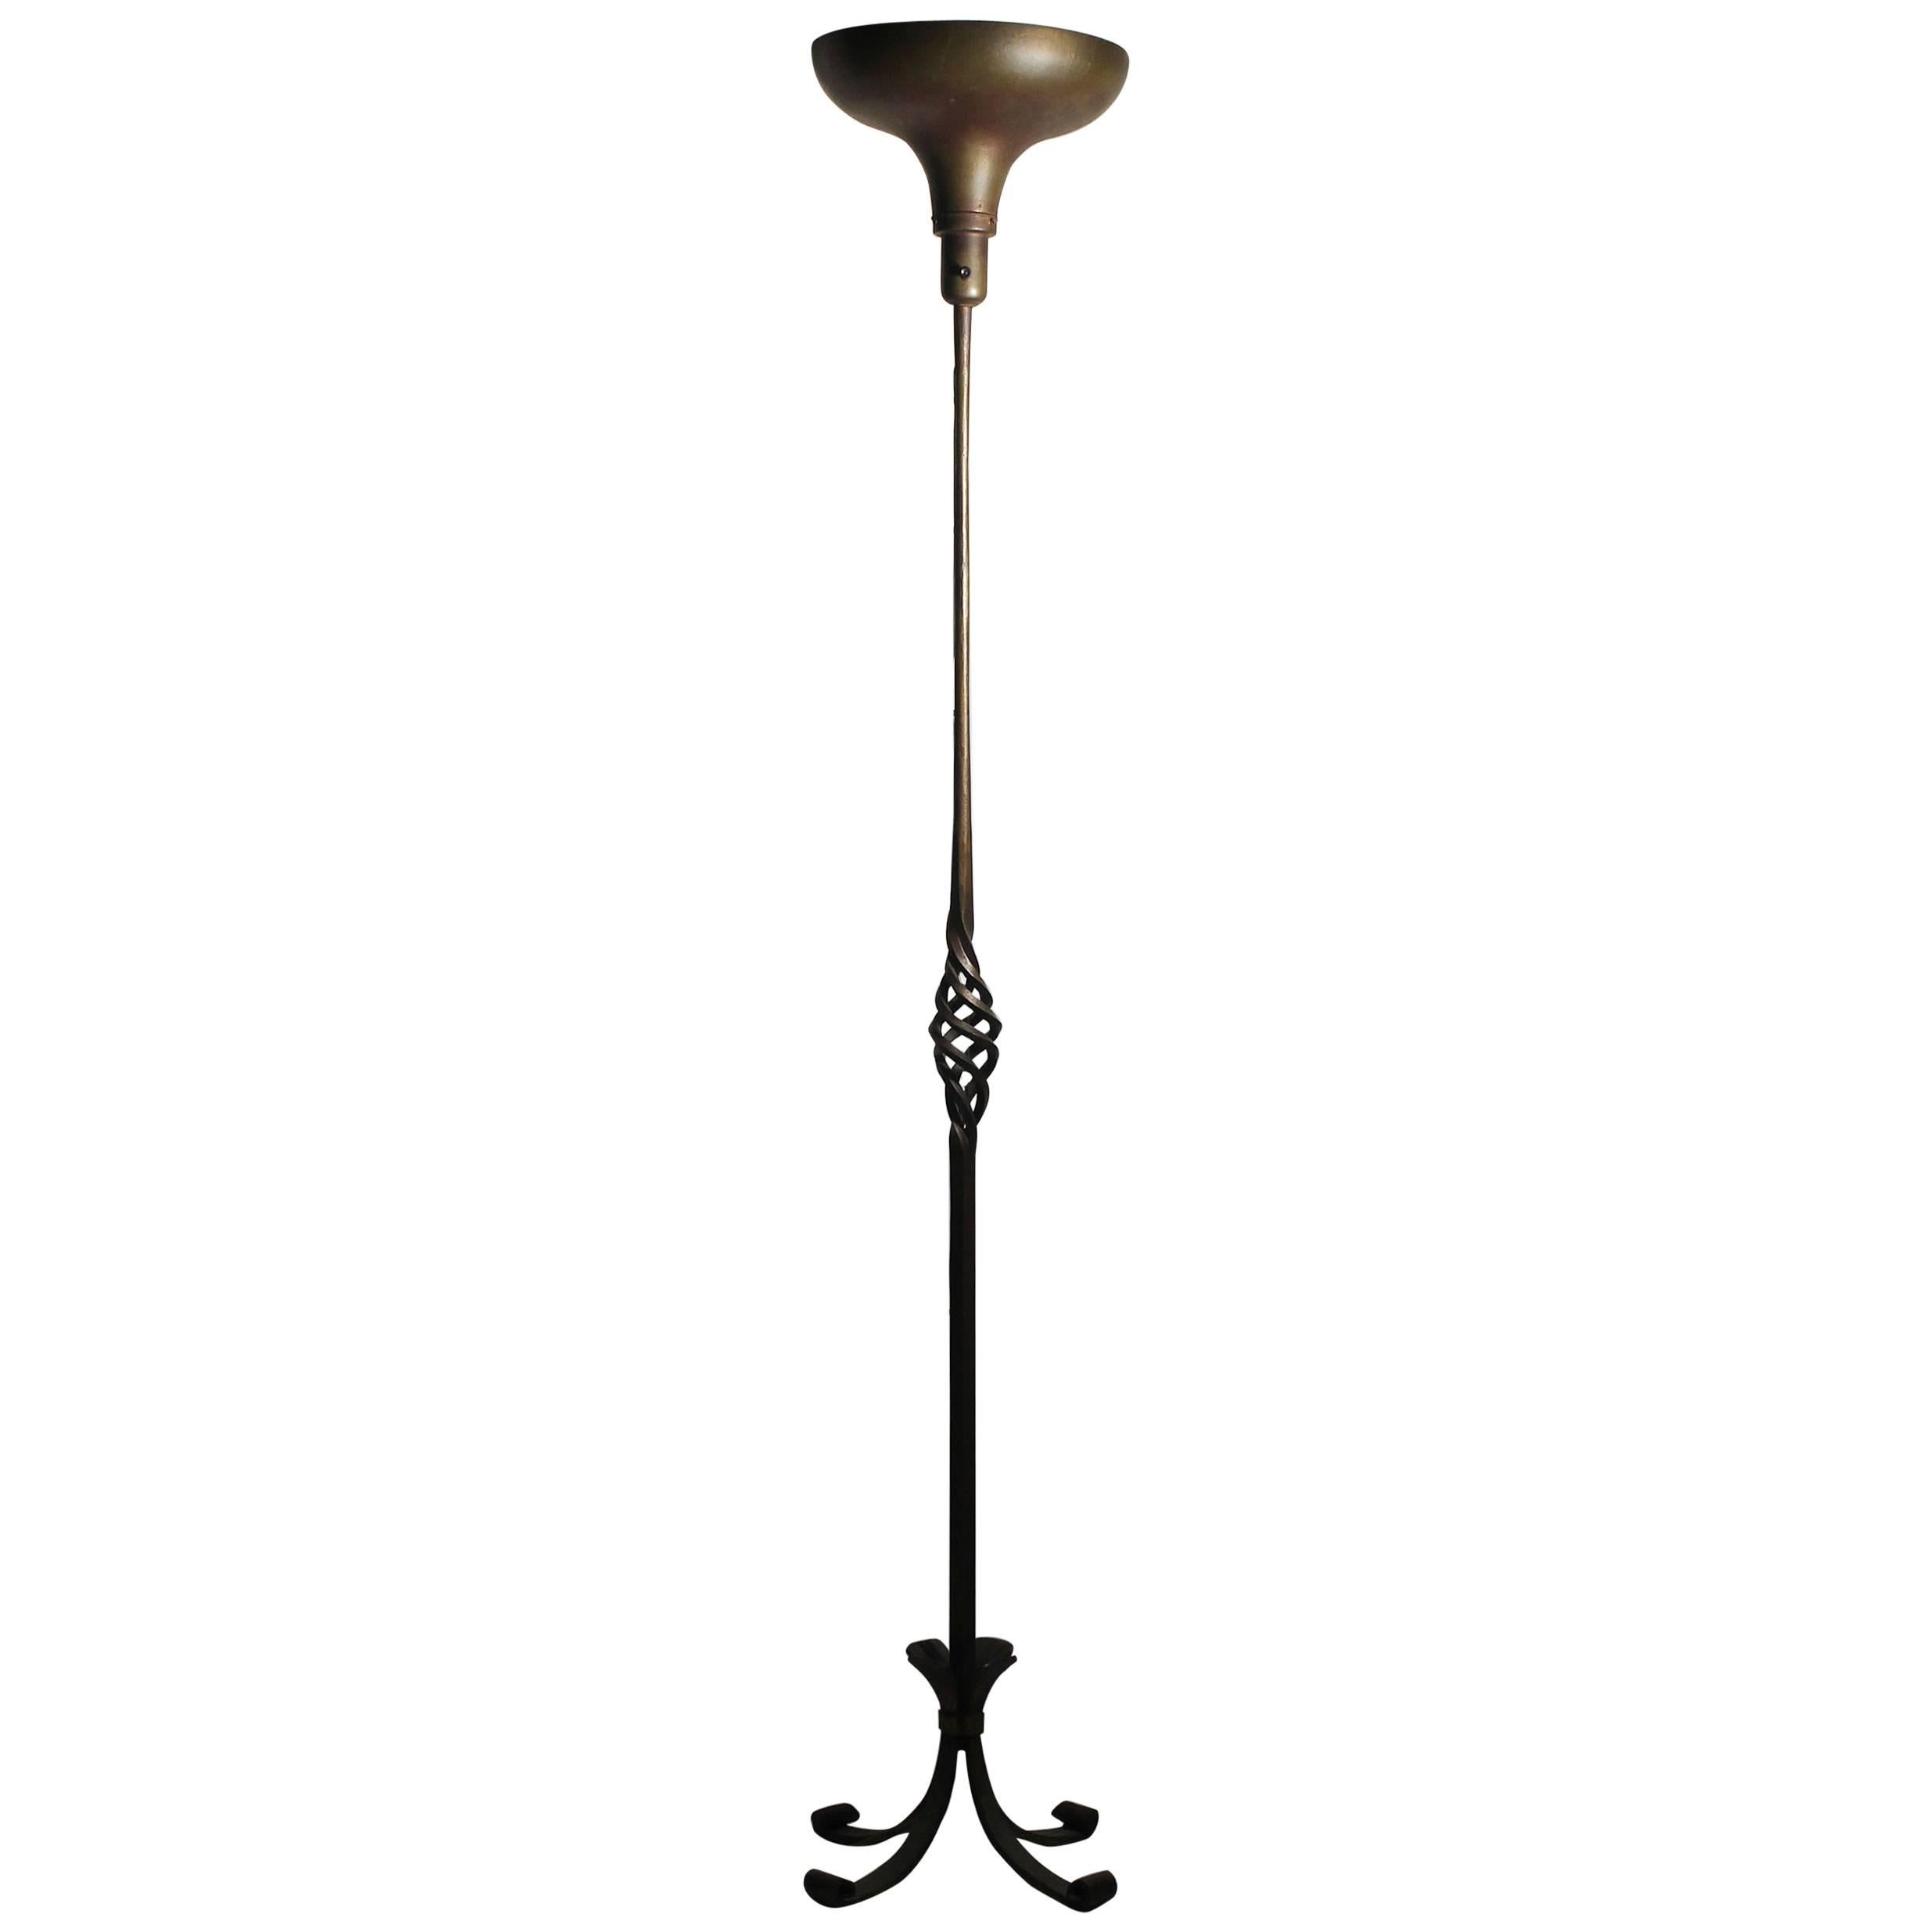 Erwin Gruen Hand-Forged Wrought Iron Gilded Torchere Floor Lamp For Sale